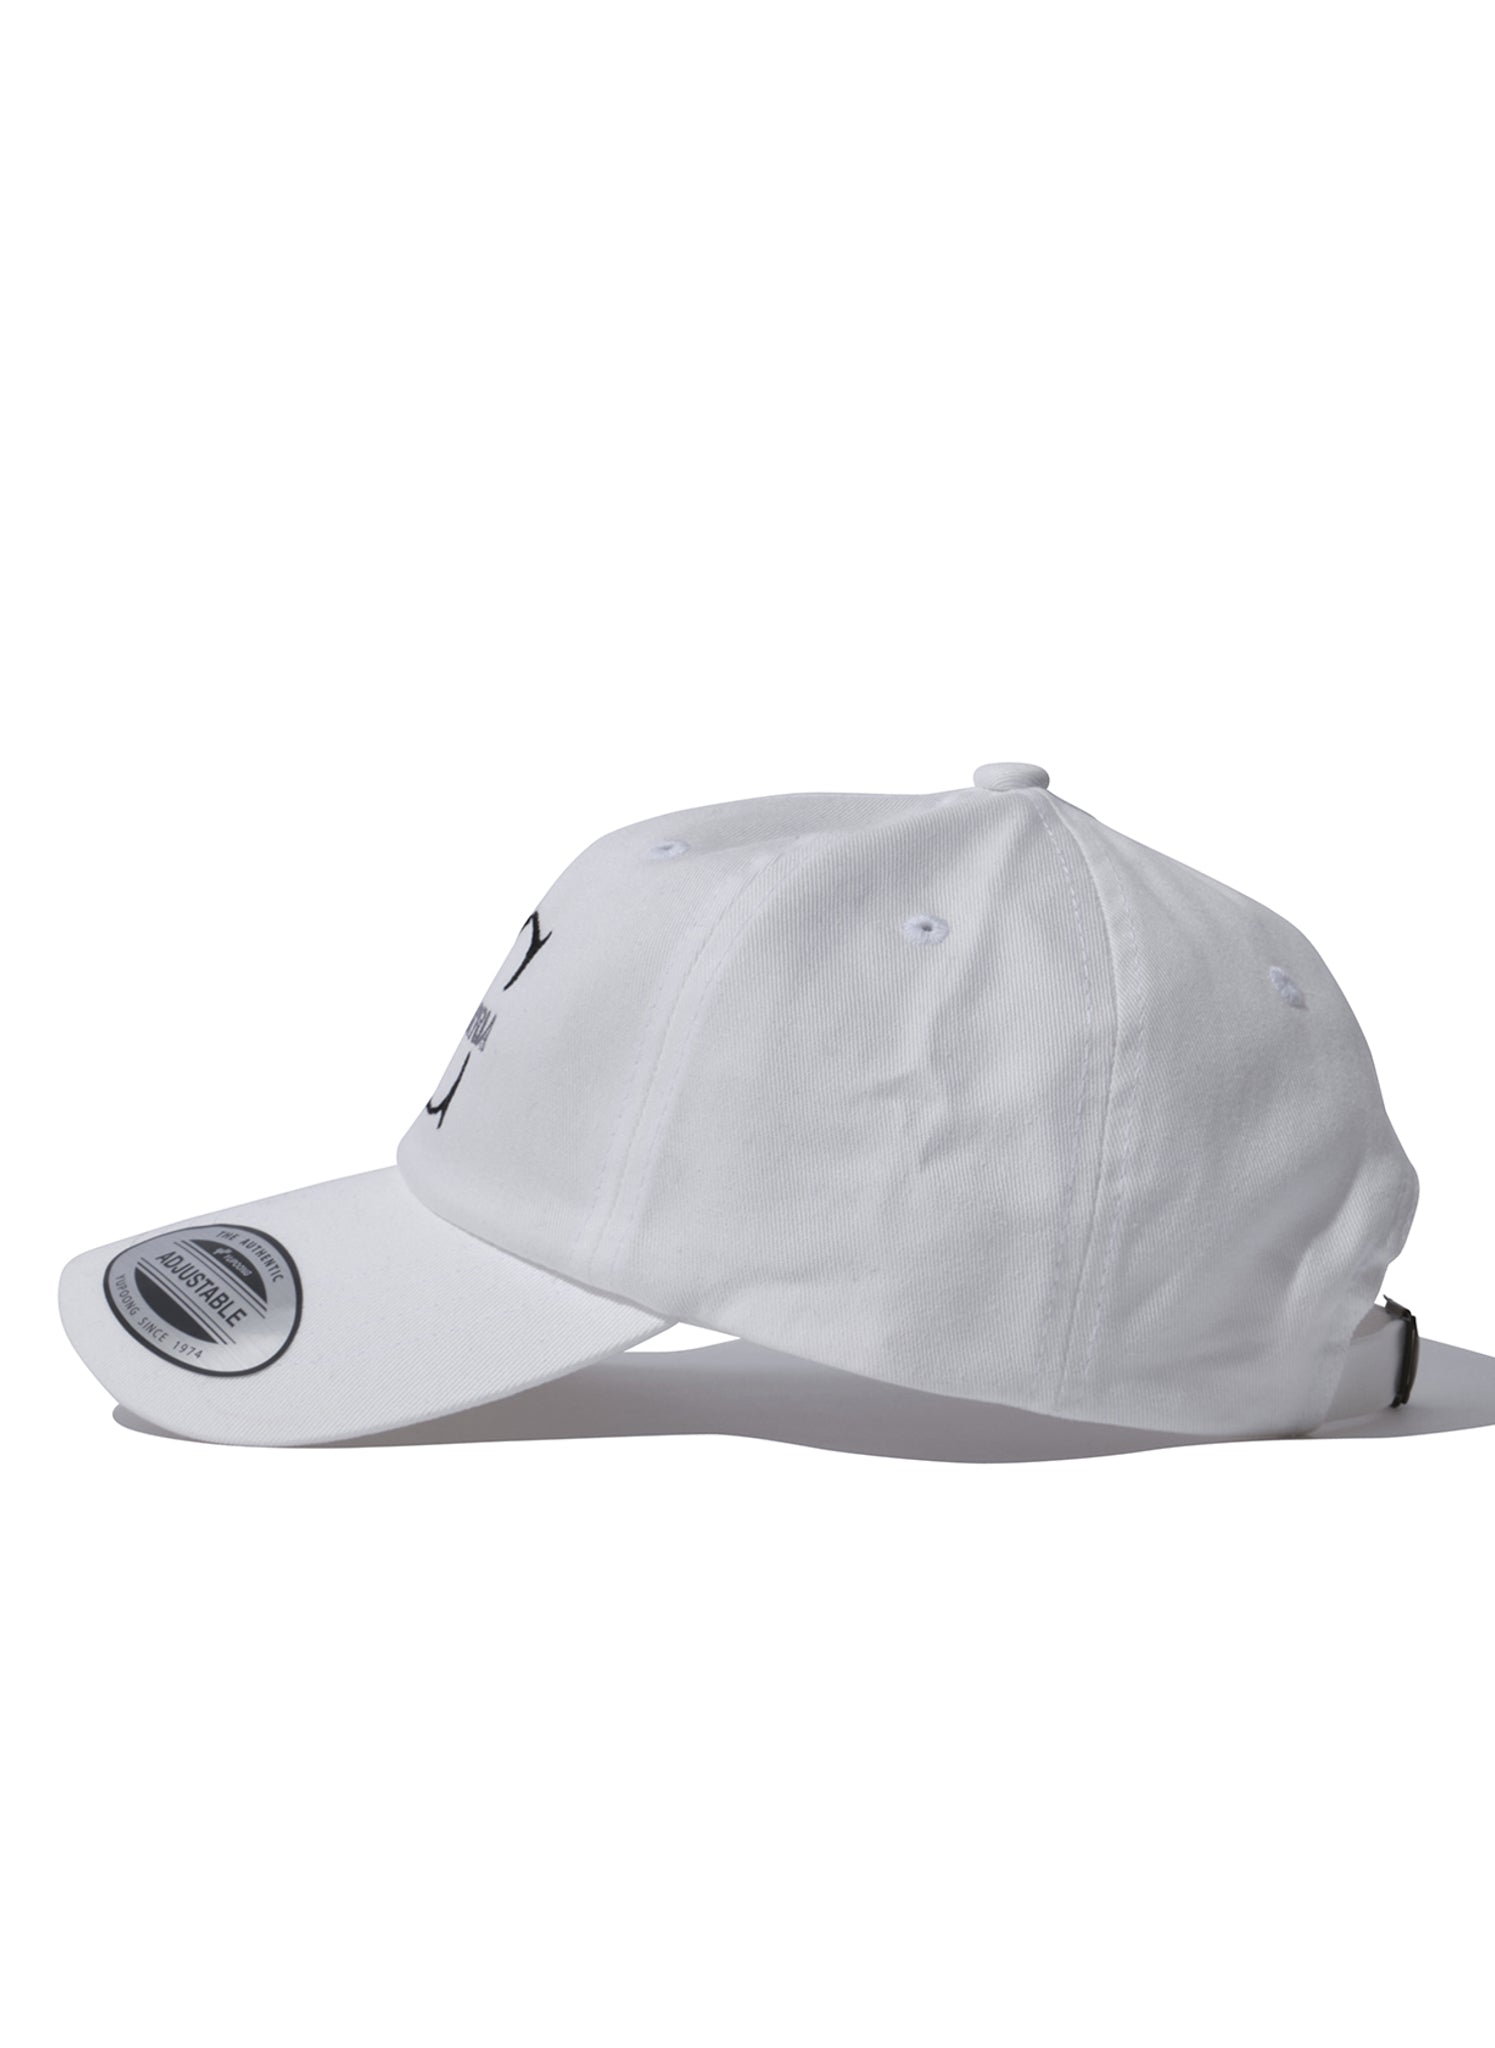 <span style="color: #f50b0b;">Last One</span> WILLY CHAVARRIA / WILLY CAP 2 WHITE